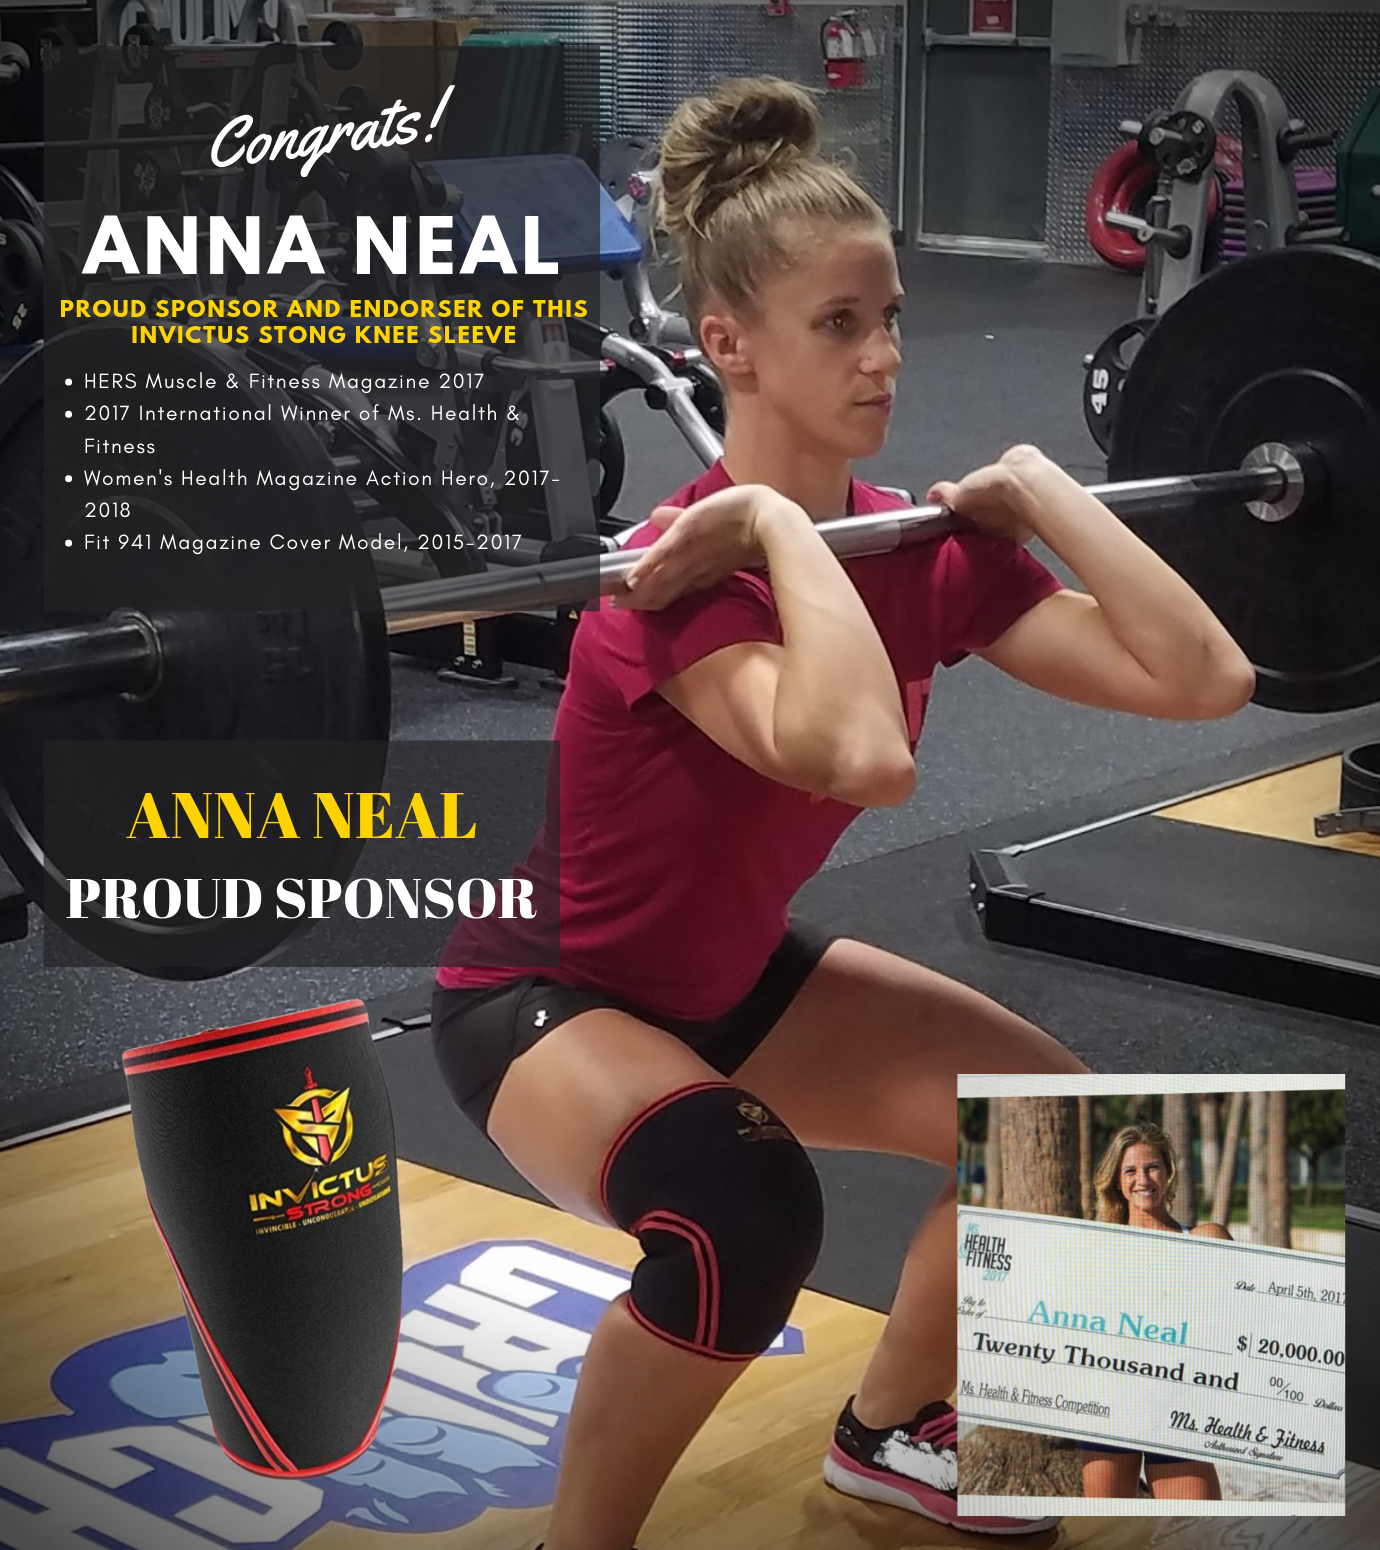 Pic of Anna Neal doing a Squat with the Invictus Strong knee Sleeve on